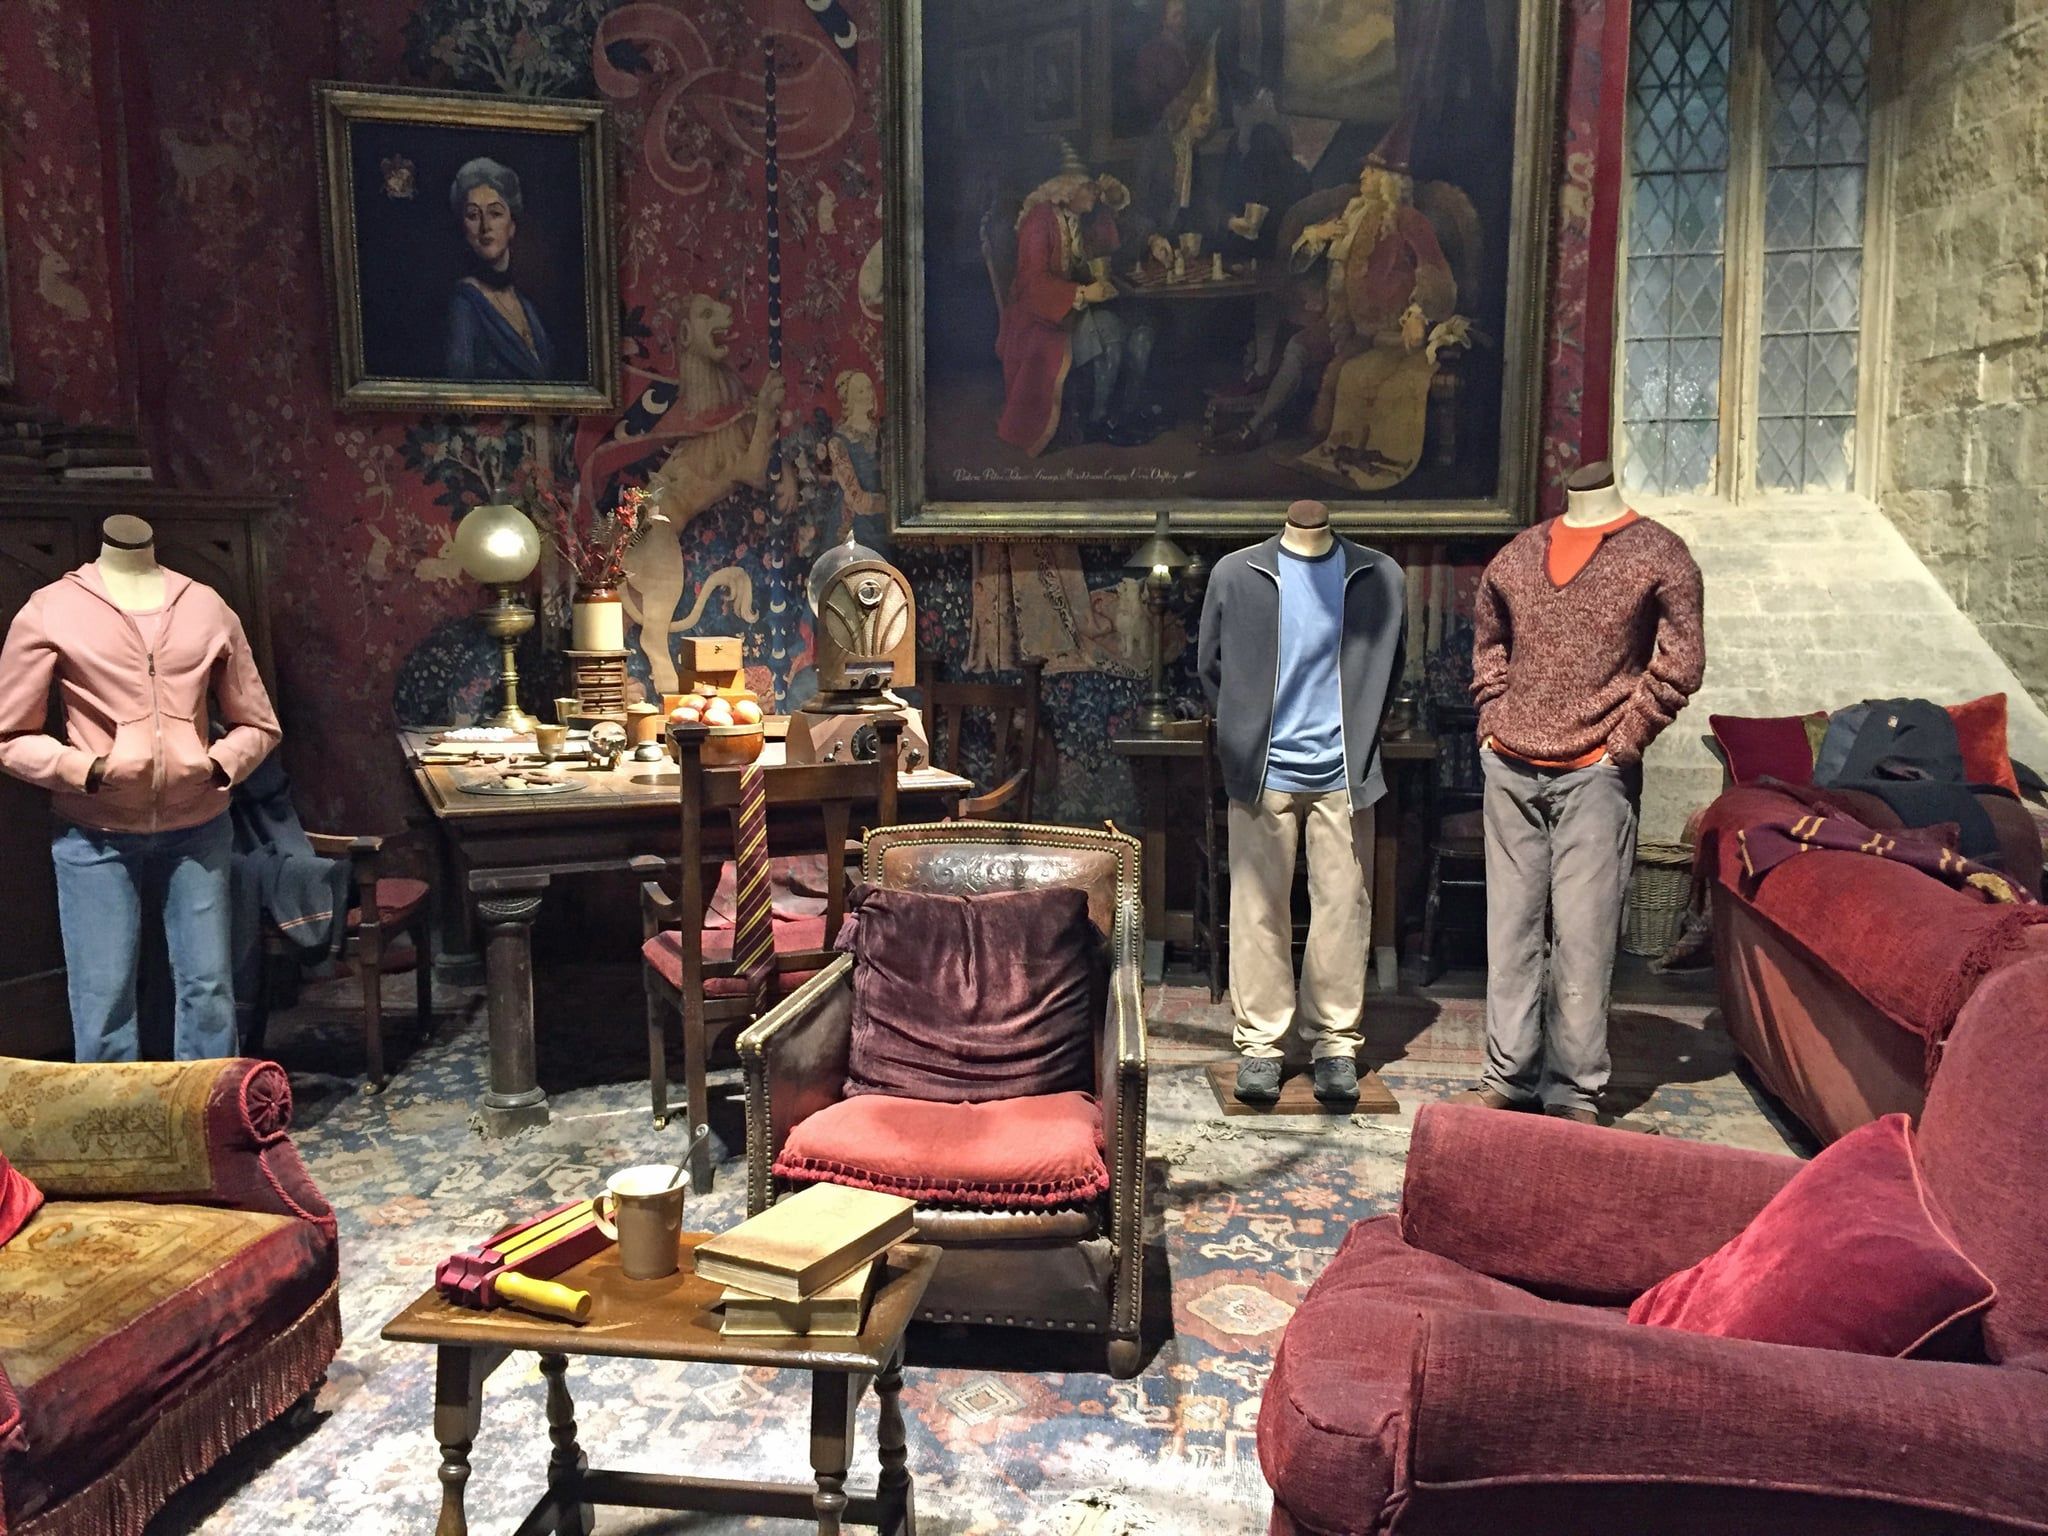 The Gryffindor common room is just as cozy as it looked in the films. The 1 Place That Must Be on Any True Harry Potter Fan's Bucket List. POPSUGAR Travel Photo 34